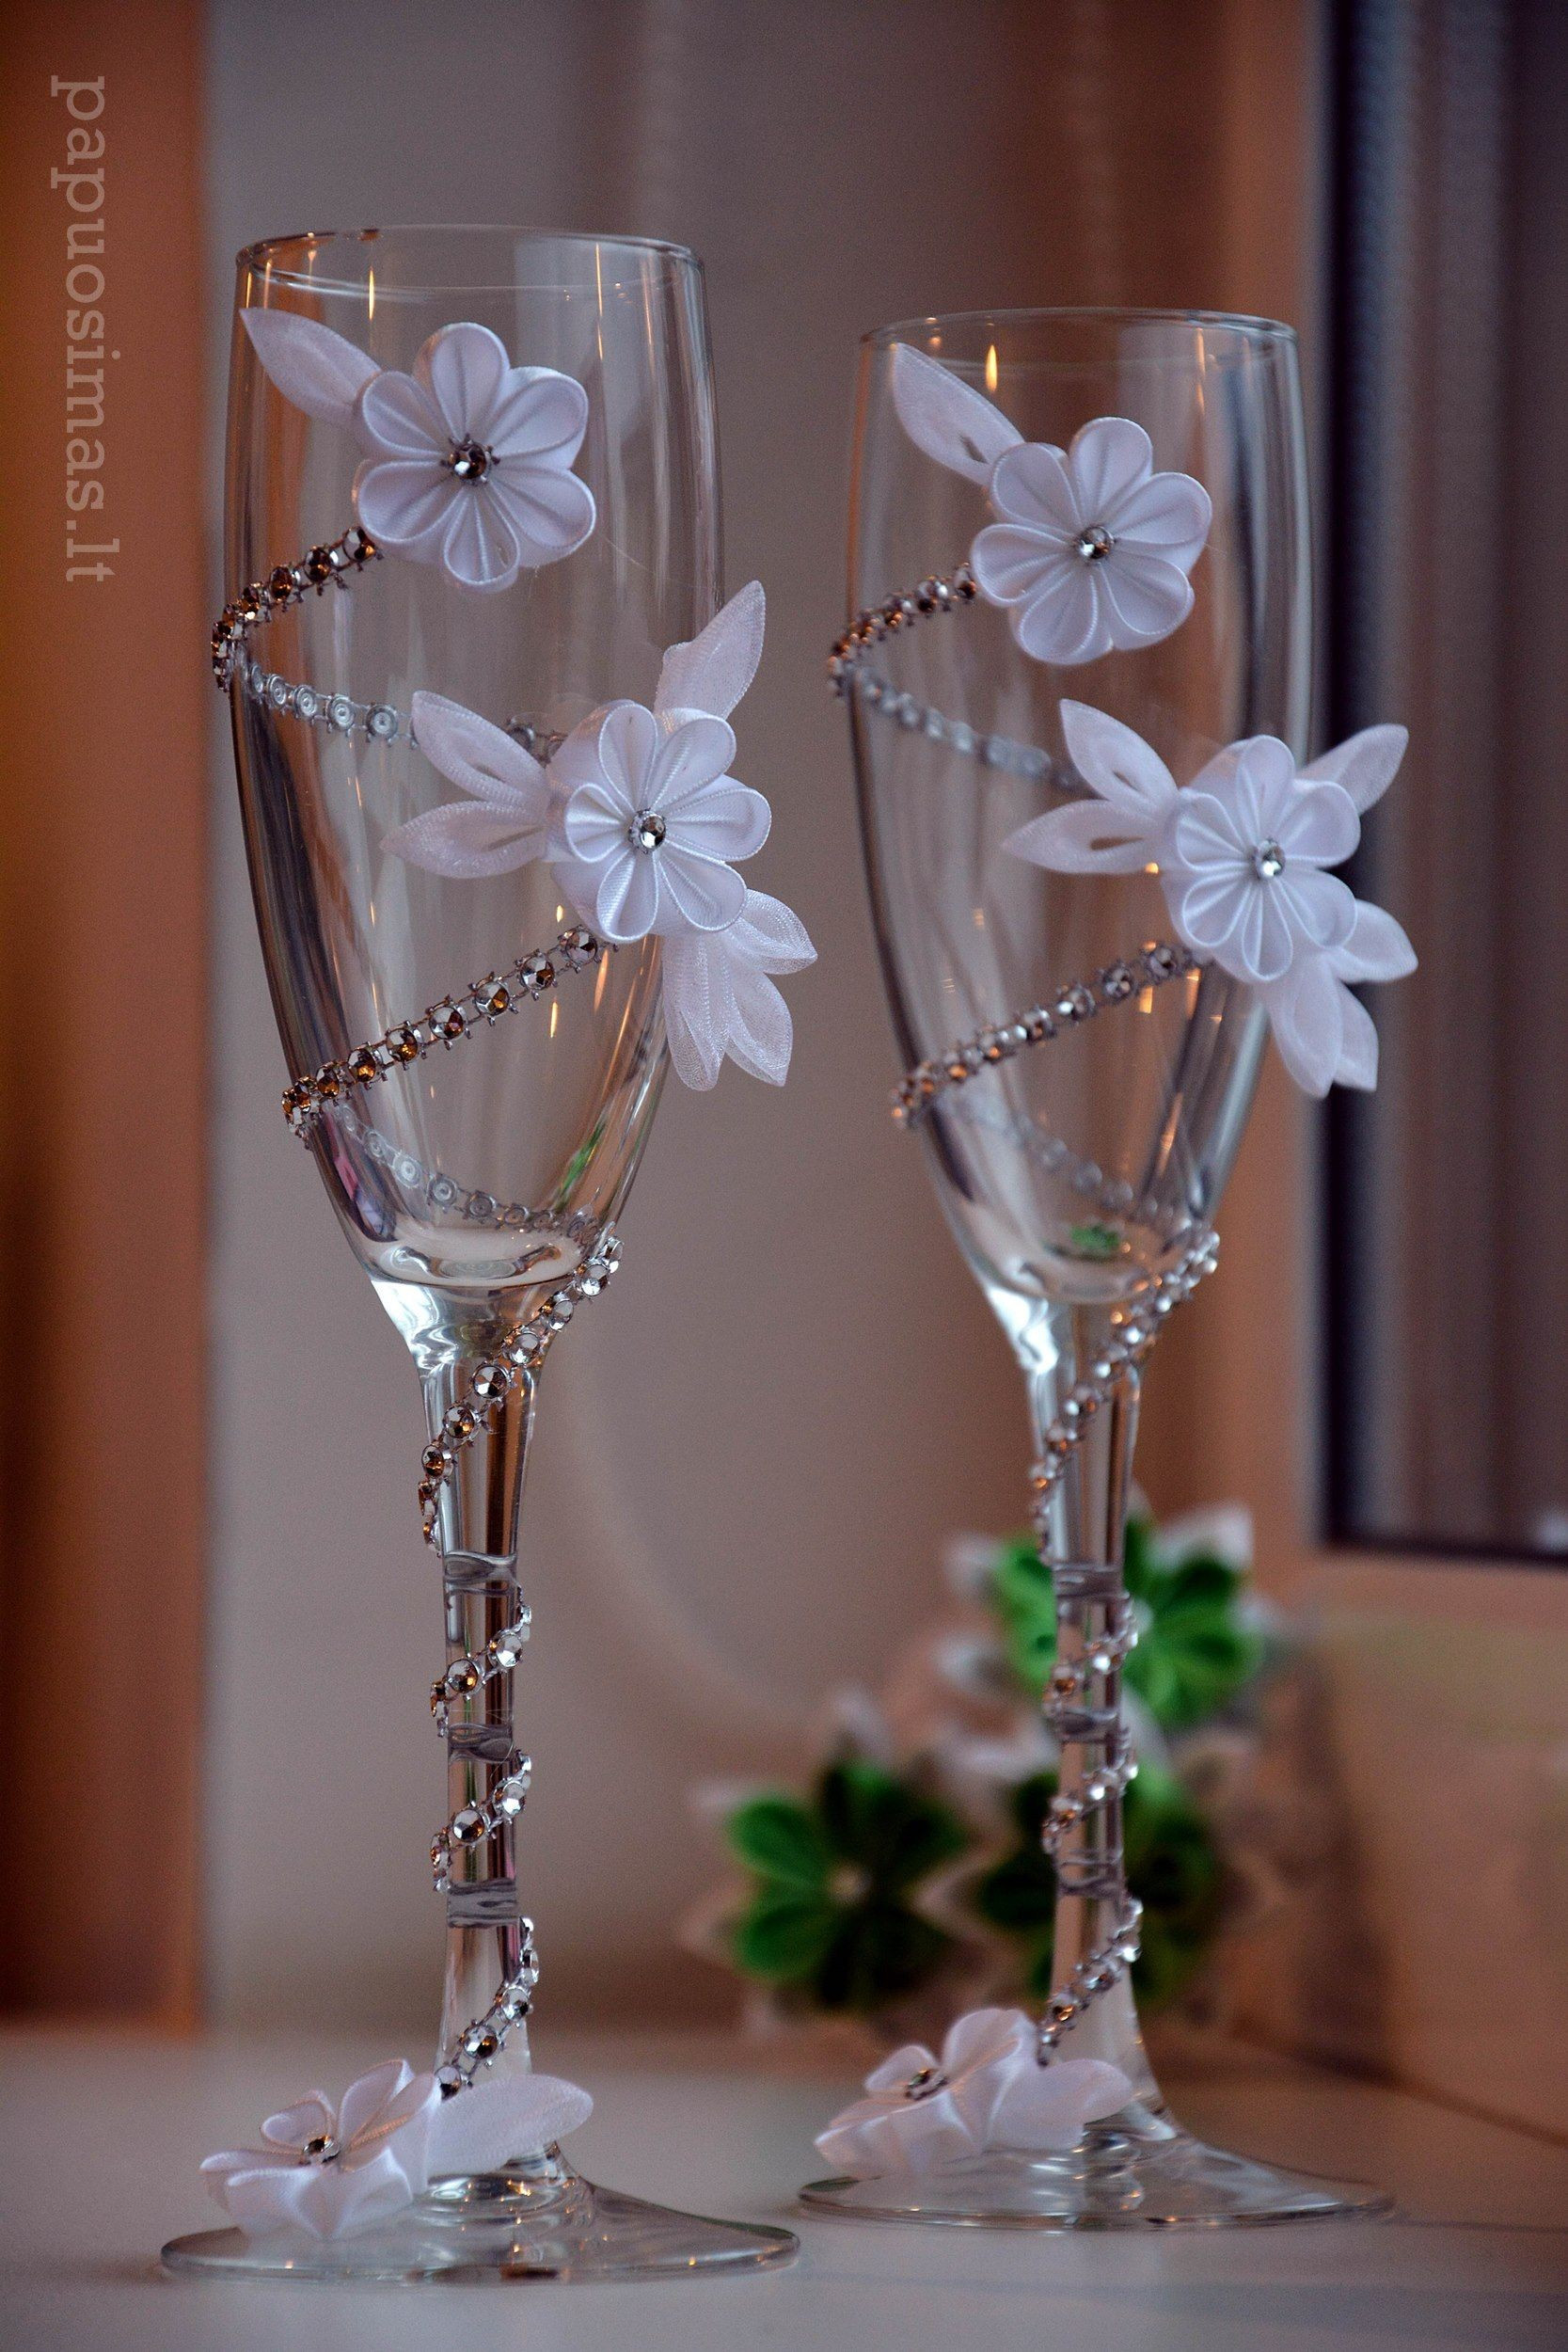 22 Awesome Dollar Tree Tall Vases 2024 free download dollar tree tall vases of wedding glass decoration new decoration 1 an beau dollar tree inside wedding glass decoration inspirational maybe just one flower on the brides haha but the diamond